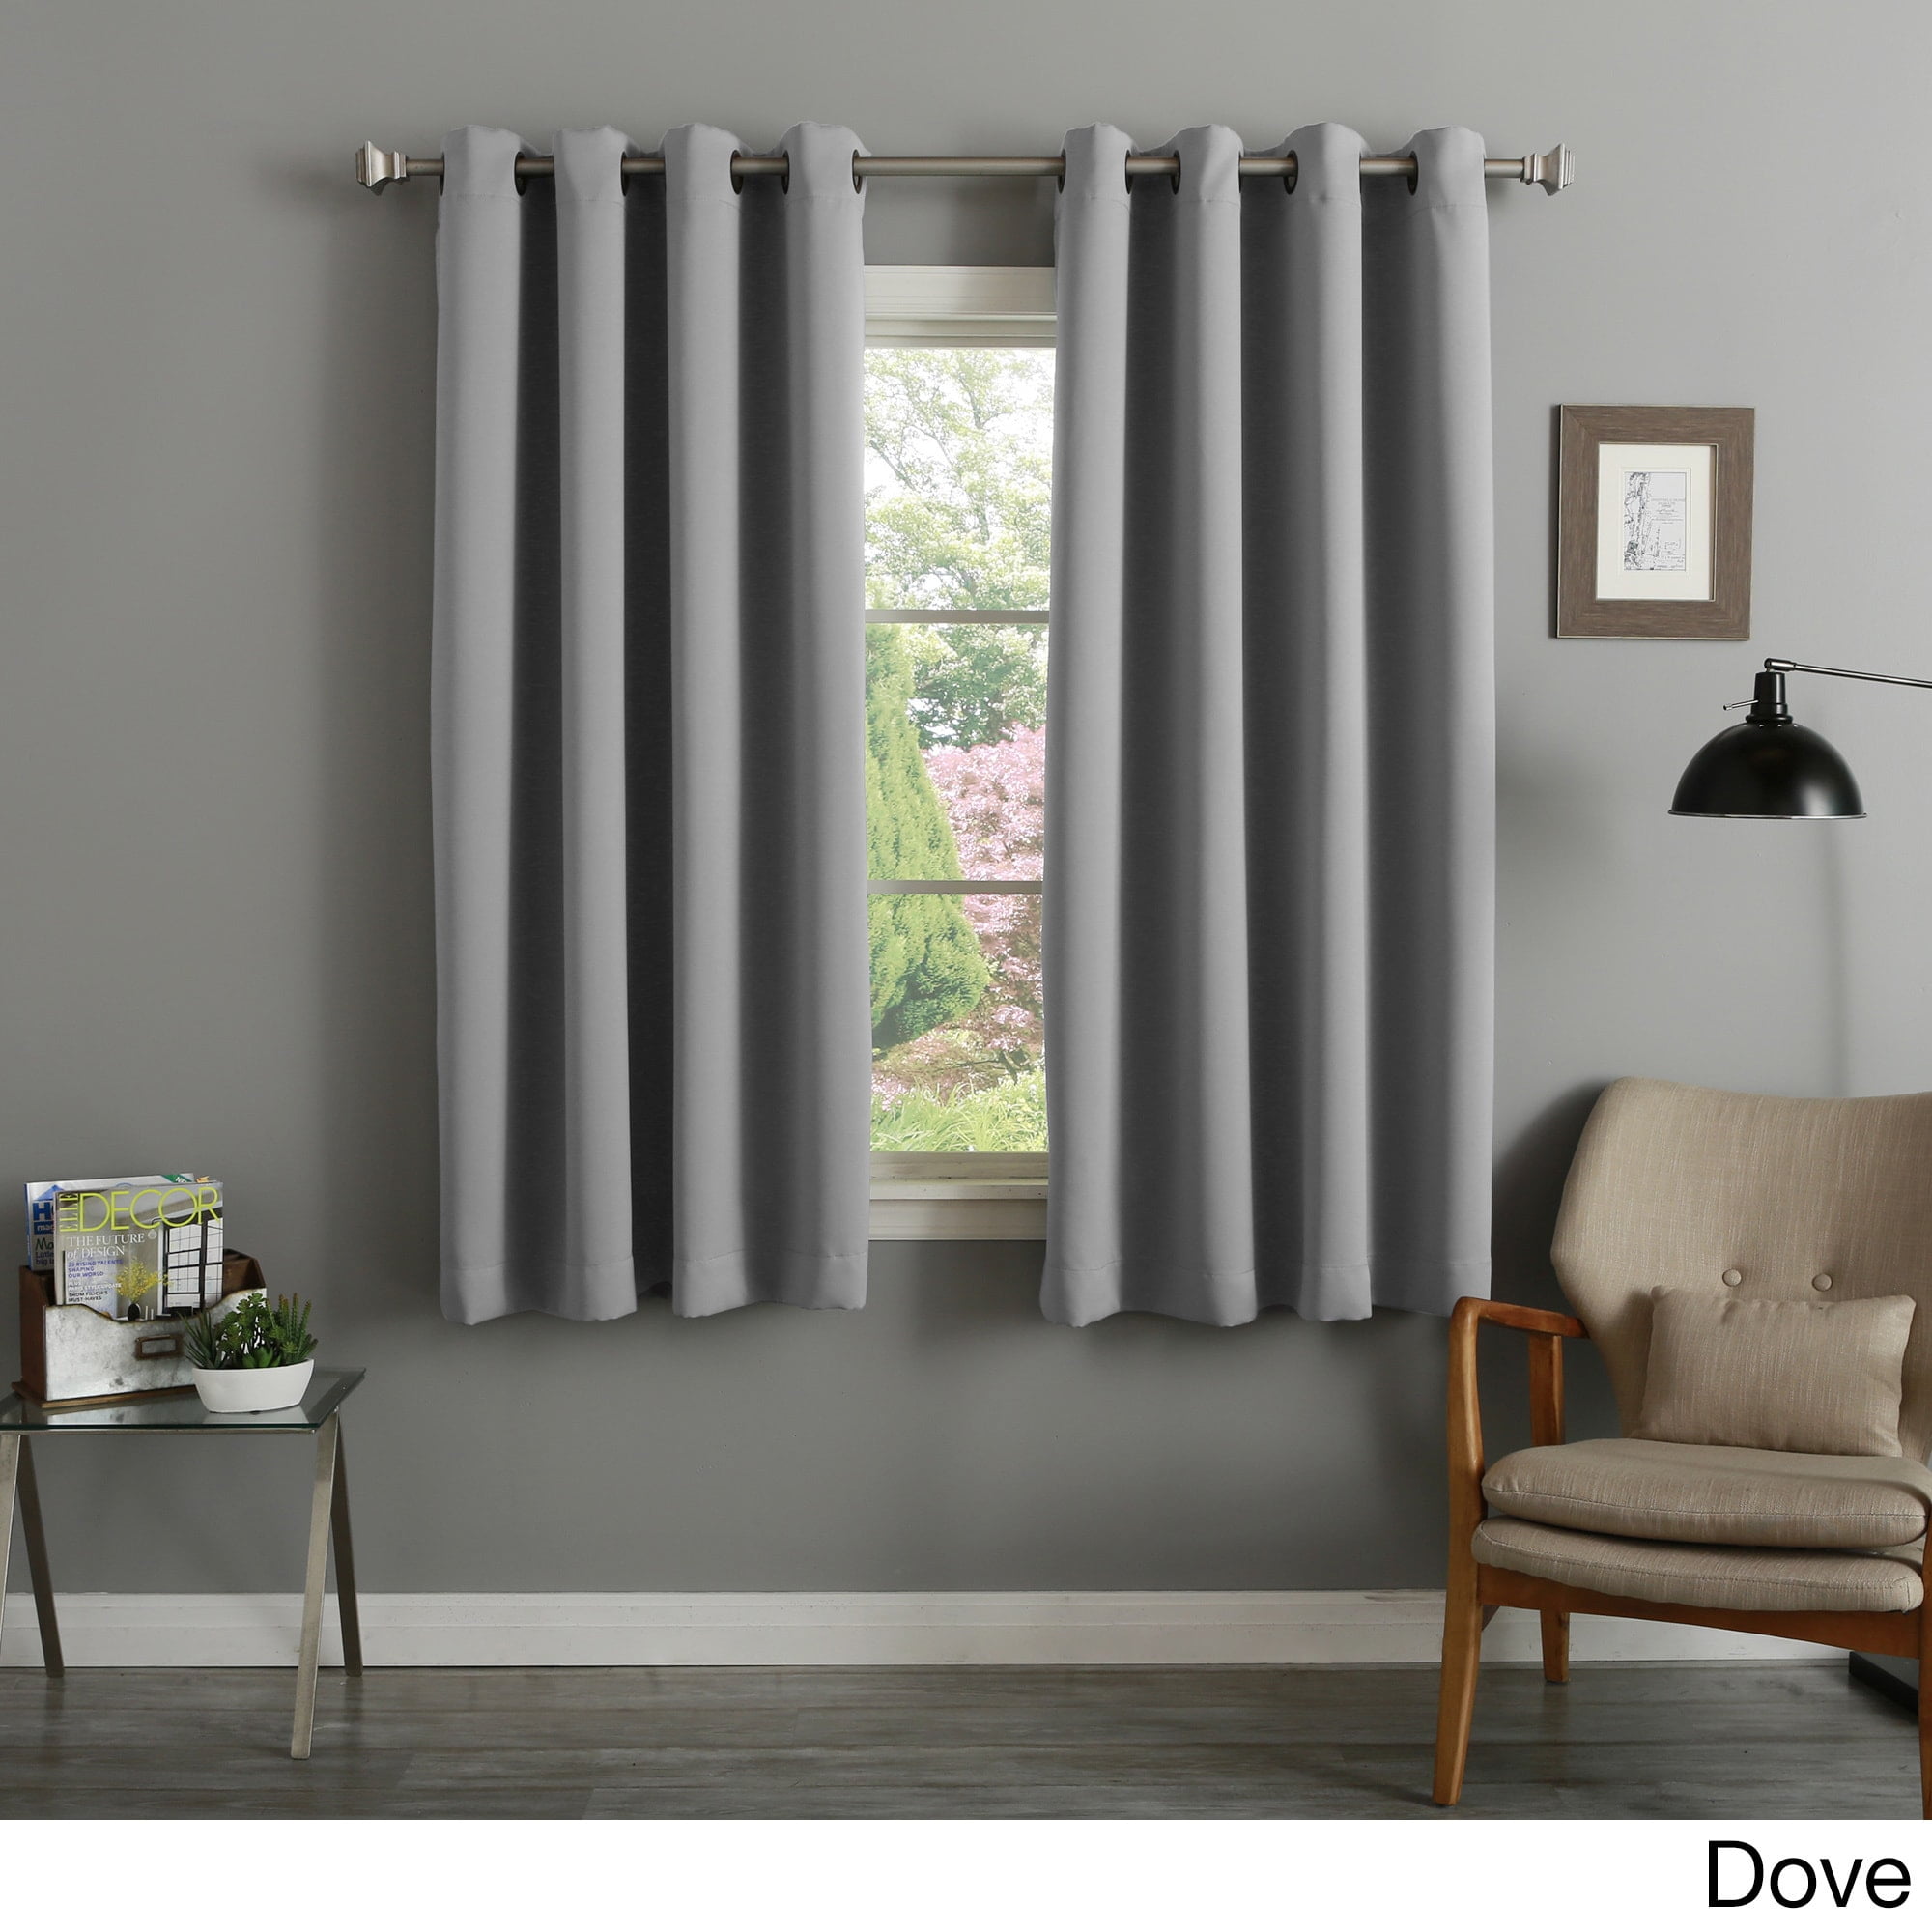 Aurora Home 54 Inch Thermal Insulated Blackout Curtain Panel Pair - 52 X 54